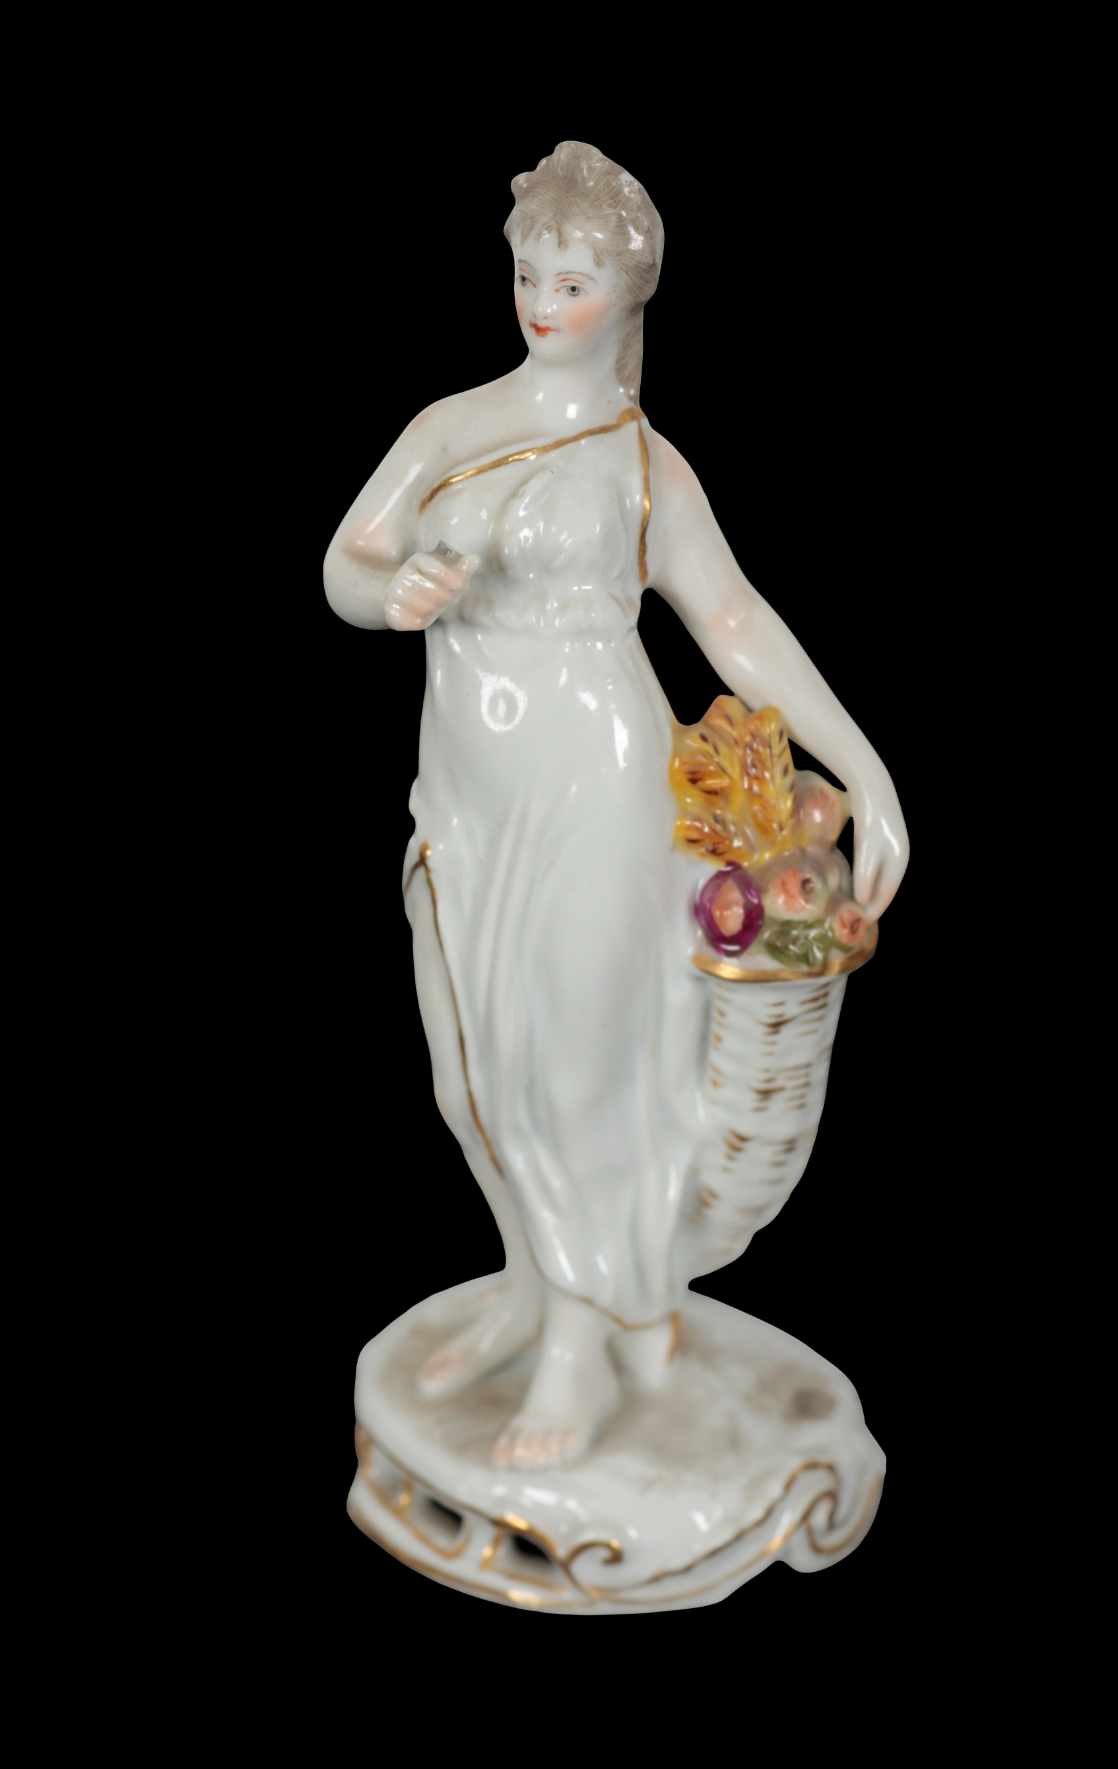 AN EARLY 20TH CENTURY SITZENDORF PORCELAIN FIGURE OF A DUKE AND DUCHESS - Image 7 of 9